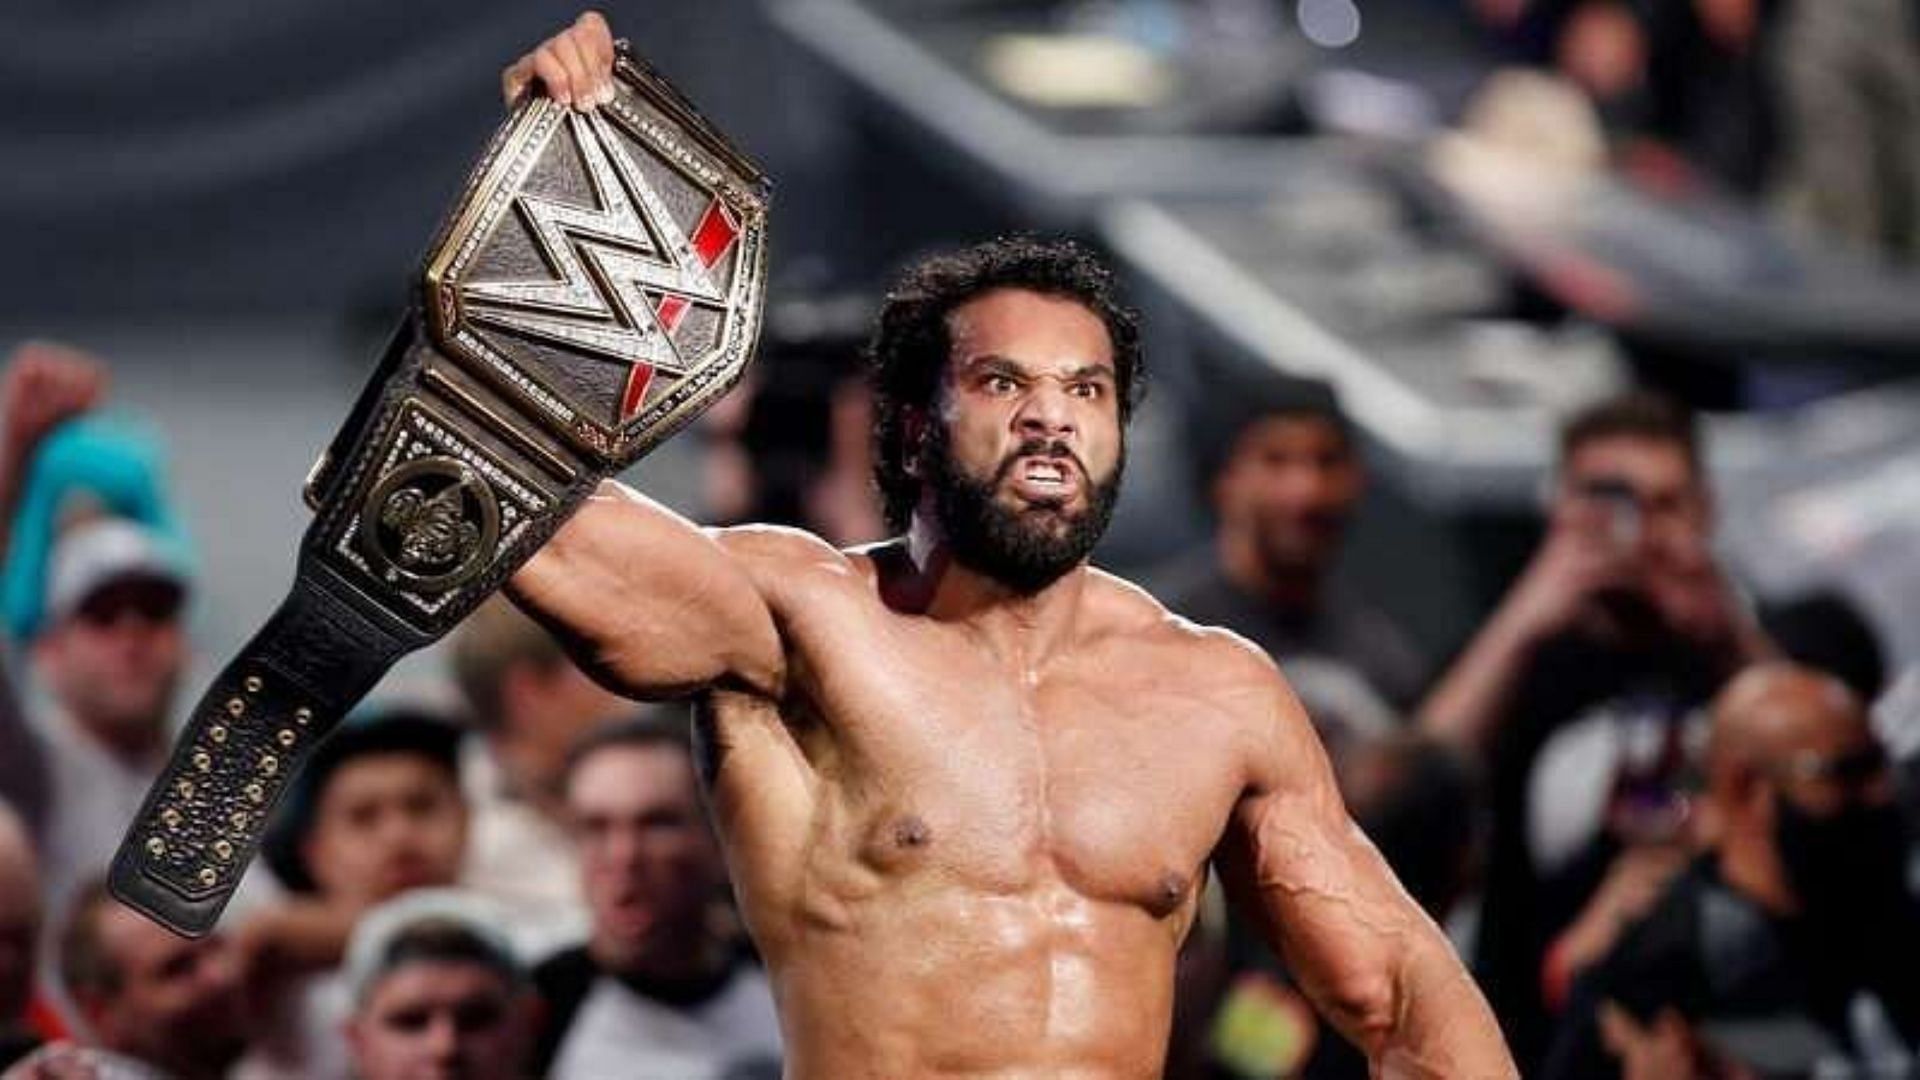 Jinder Mahal poses with the WWE Championship.